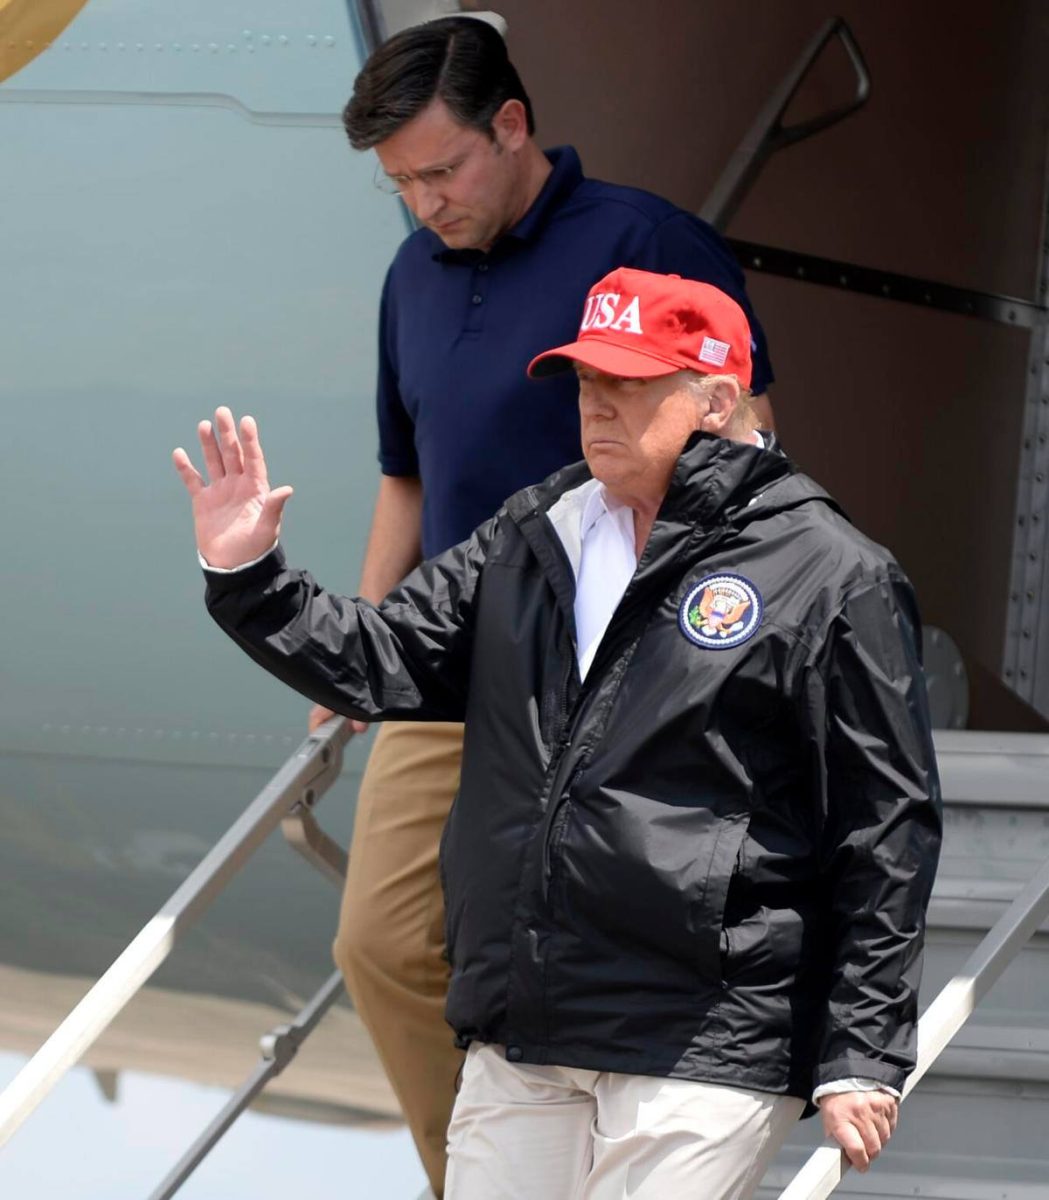 Mike Johnson (left) walks with former President Donald Trump, who is wearing a red U.S.A. hat, on Aug. 30, 2020. Senior Opinion Columnist Emily Beebe believes Johnson’s far-right ideologies make him a dangerous speaker. (Courtesy of Wikimedia Commons)